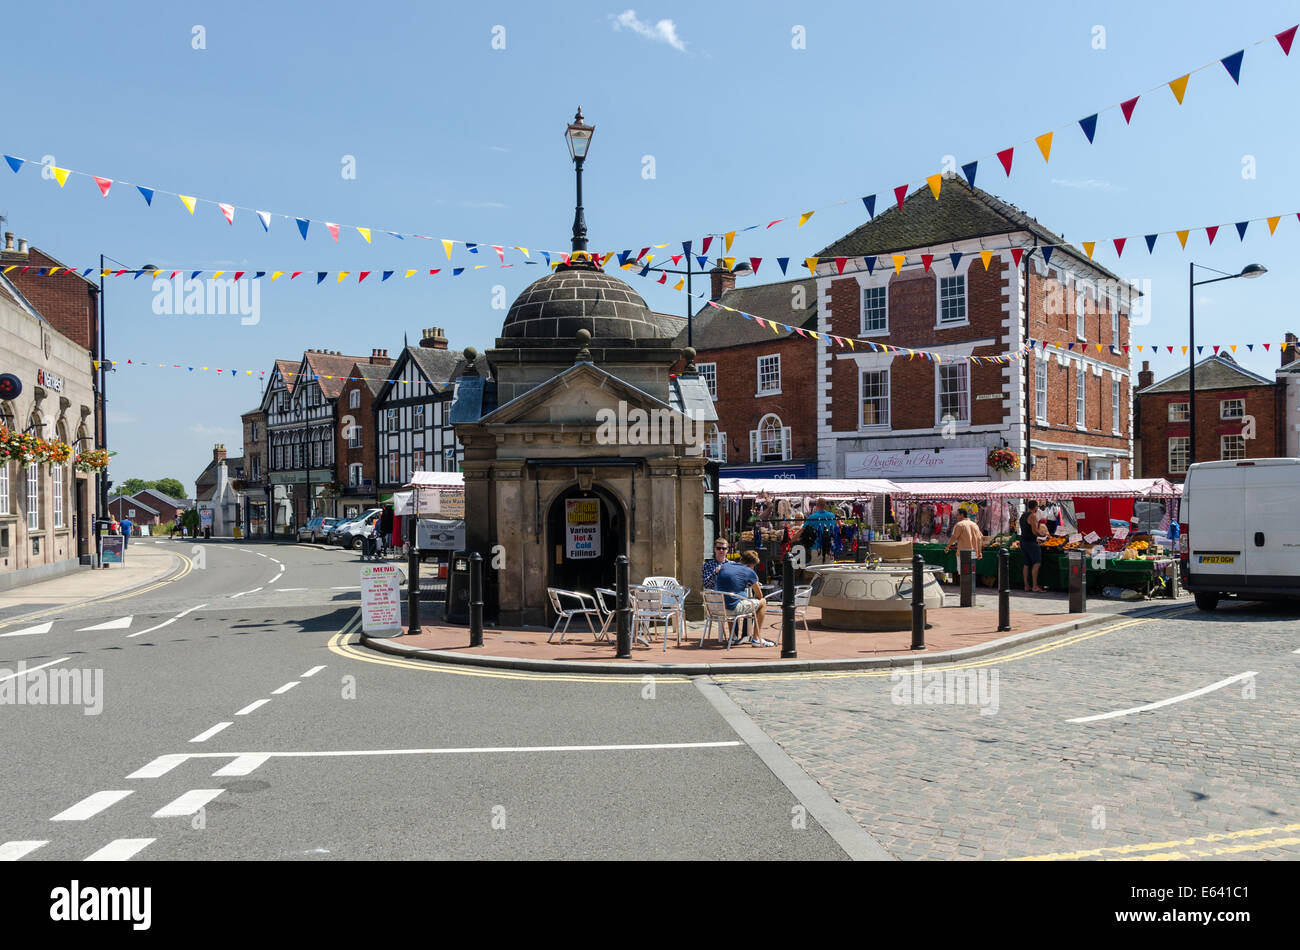 Market Place in the Staffordshire market town of Uttoxeter Stock Photo